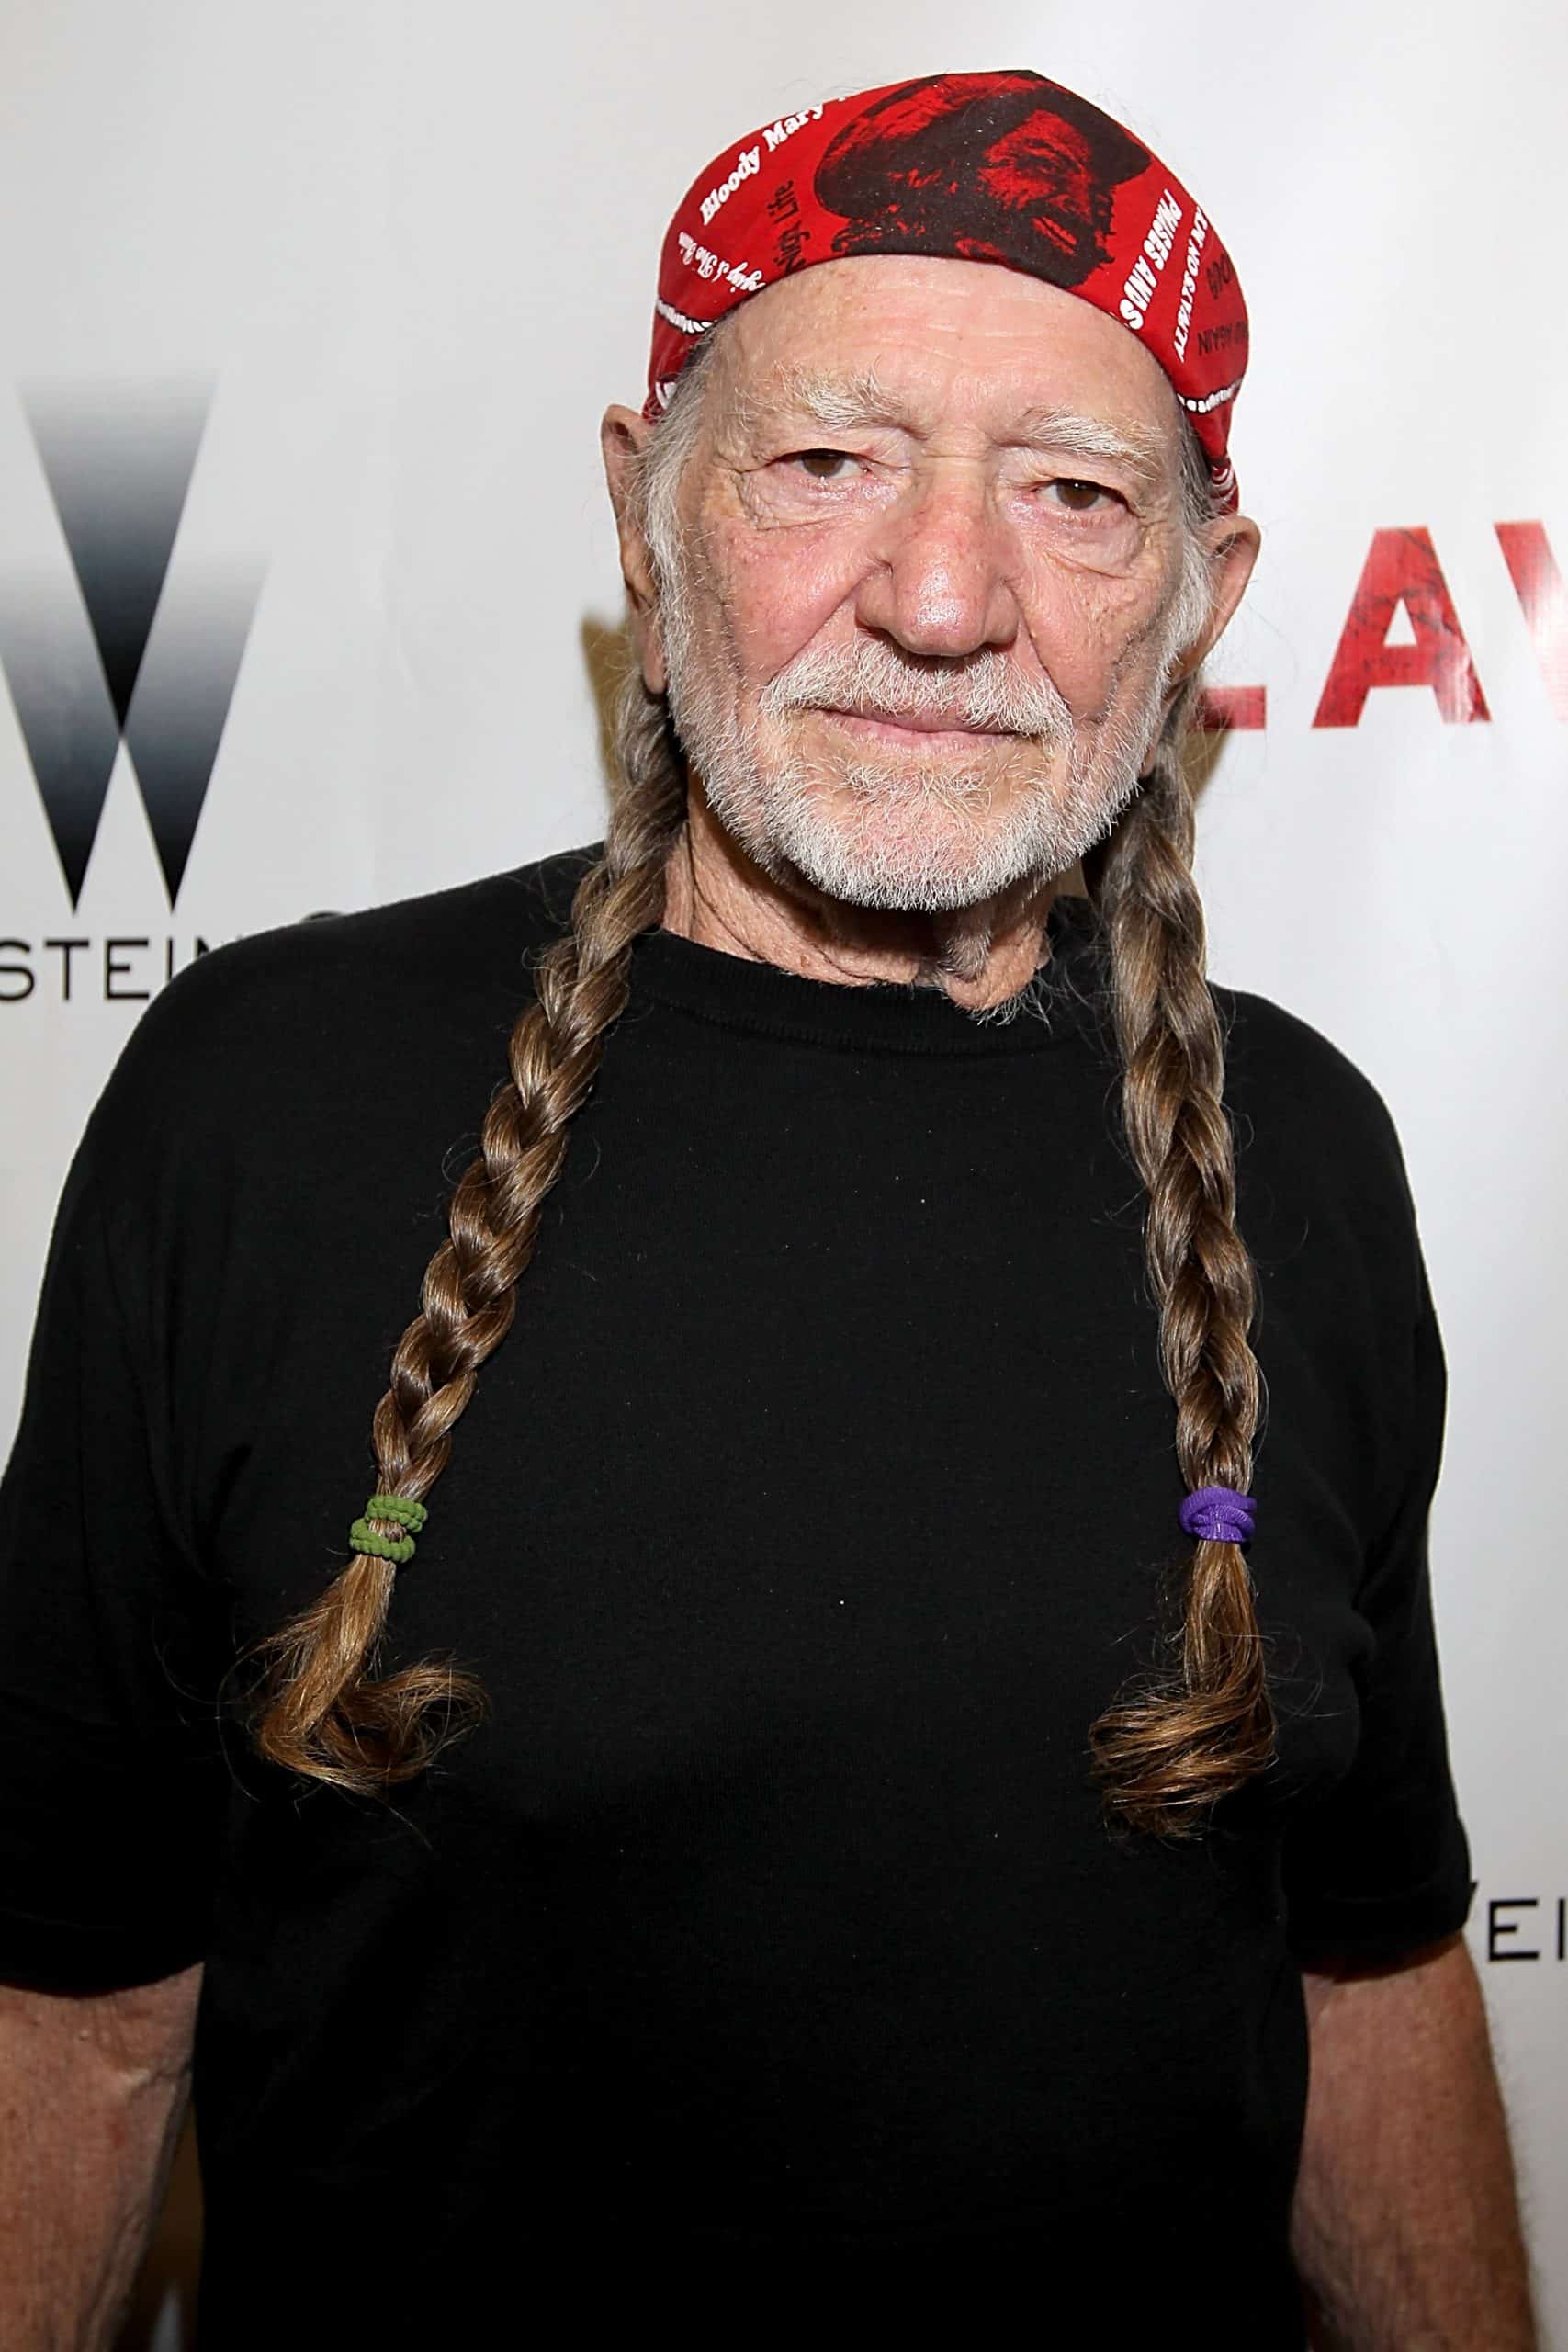 Willie Nelson is in the Rock & Roll Hall of Fame as of 2023